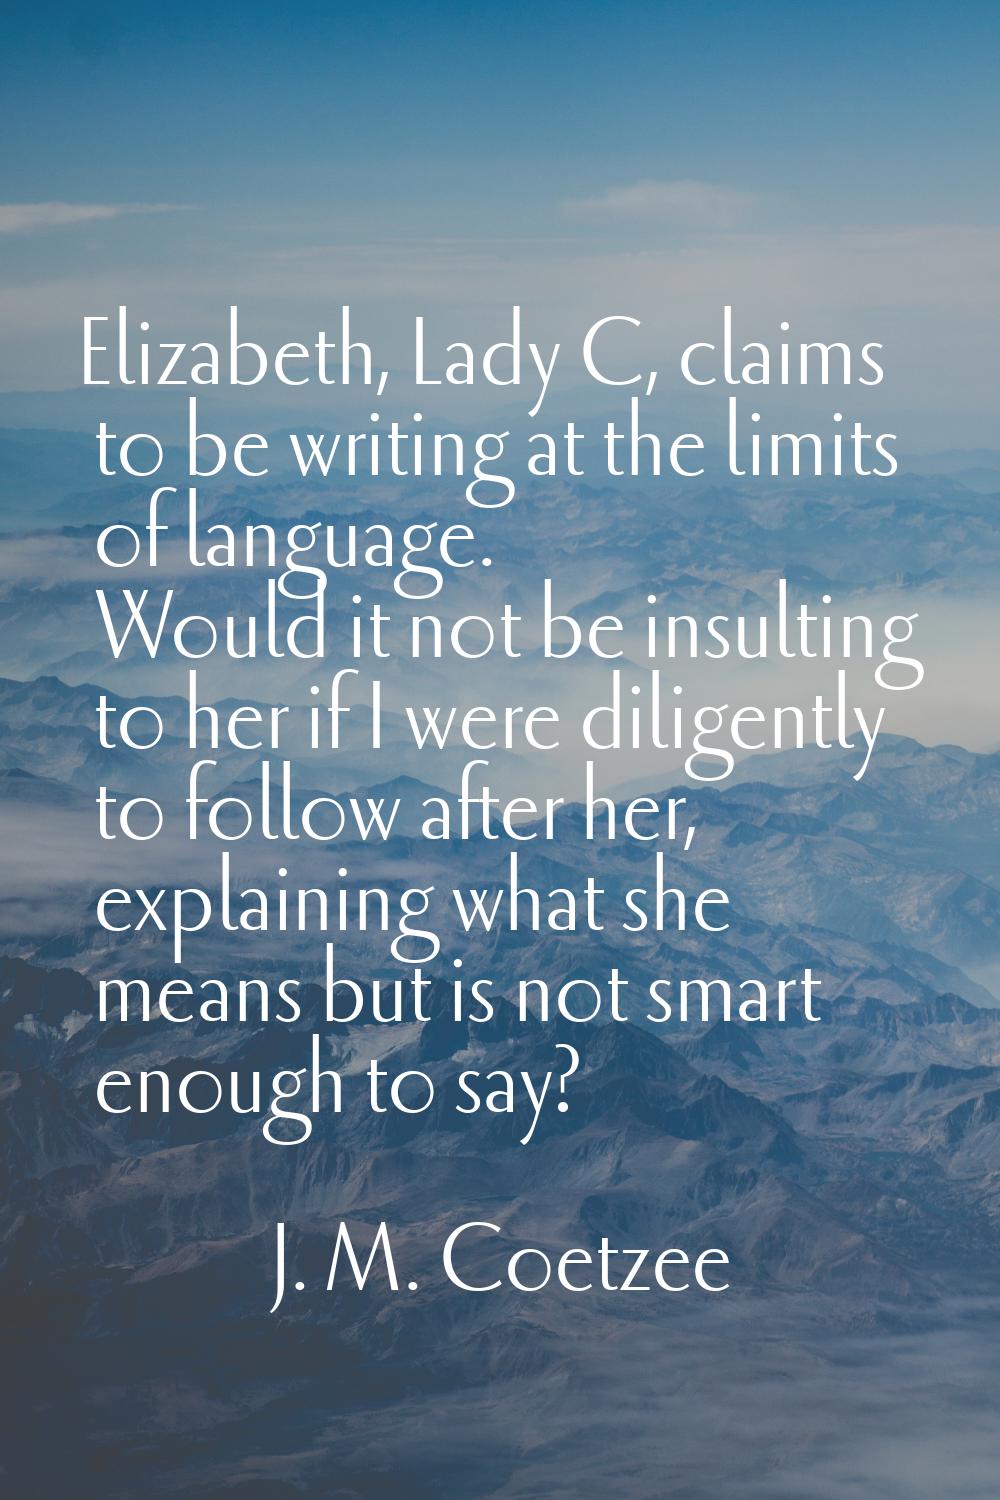 Elizabeth, Lady C, claims to be writing at the limits of language. Would it not be insulting to her